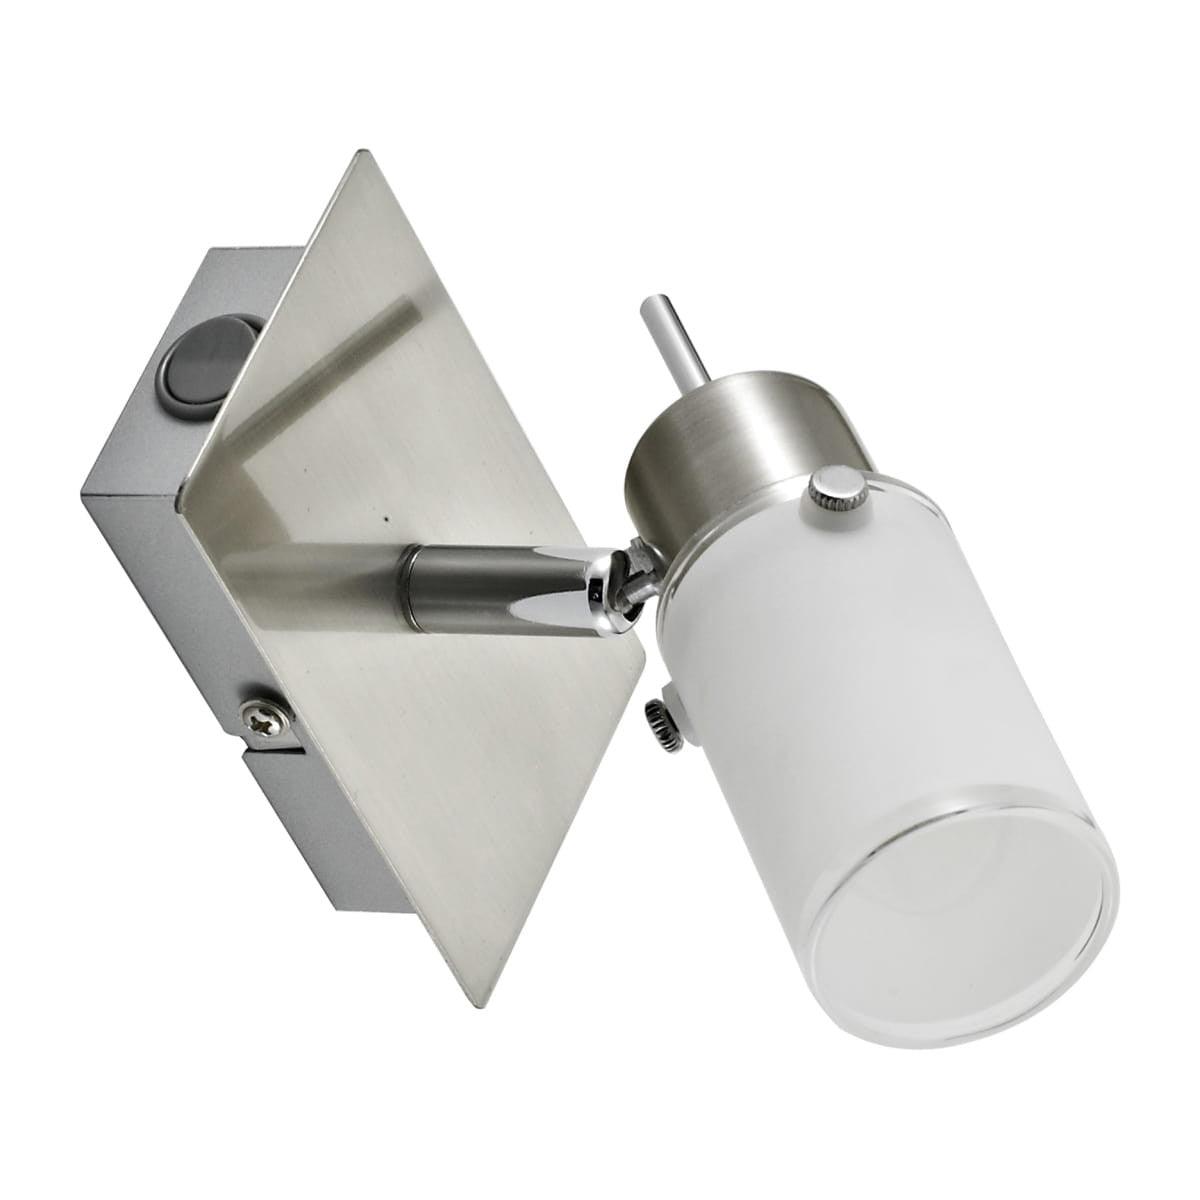 LED wall light in steel with adjustable light head and warm white light color including rocker switch - Peter Murphy Lighting & Electrical Ltd